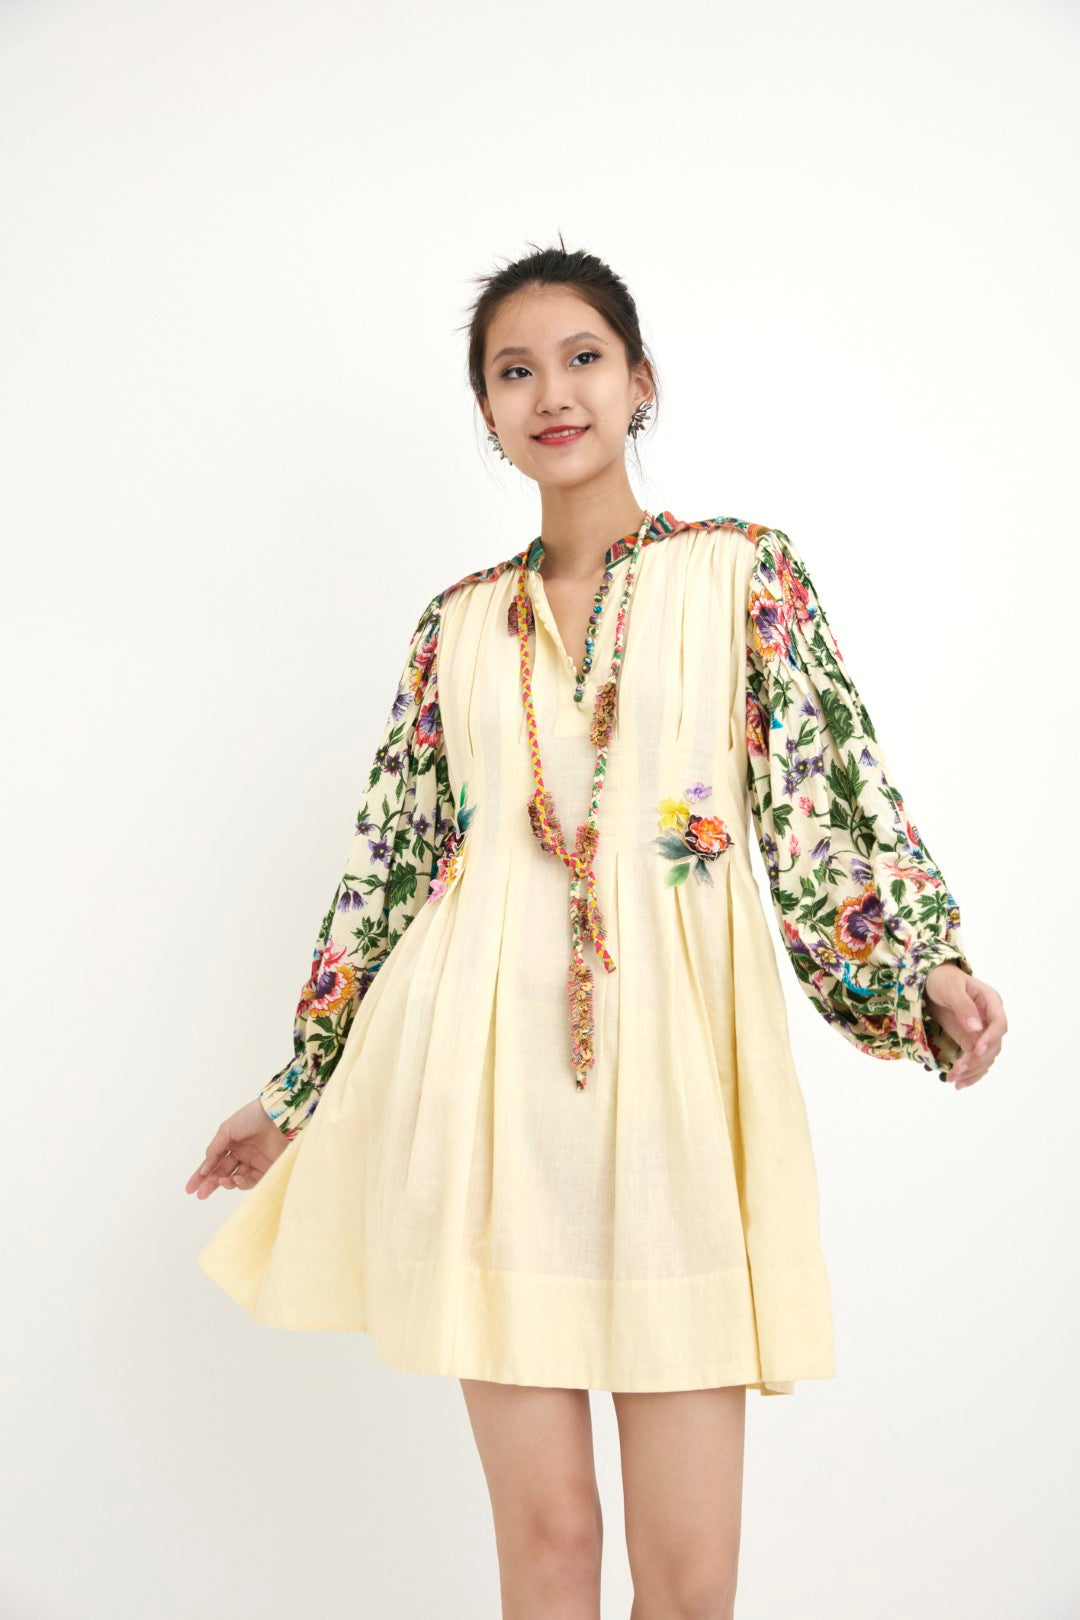 "Handwoven solid cream with cream chintz sleeve detail and hand embroidery in sequins, beads,3D flower.  100% Handwoven cotton; Lining: 100% cotton  100% Azo Free Dry Clean Only"